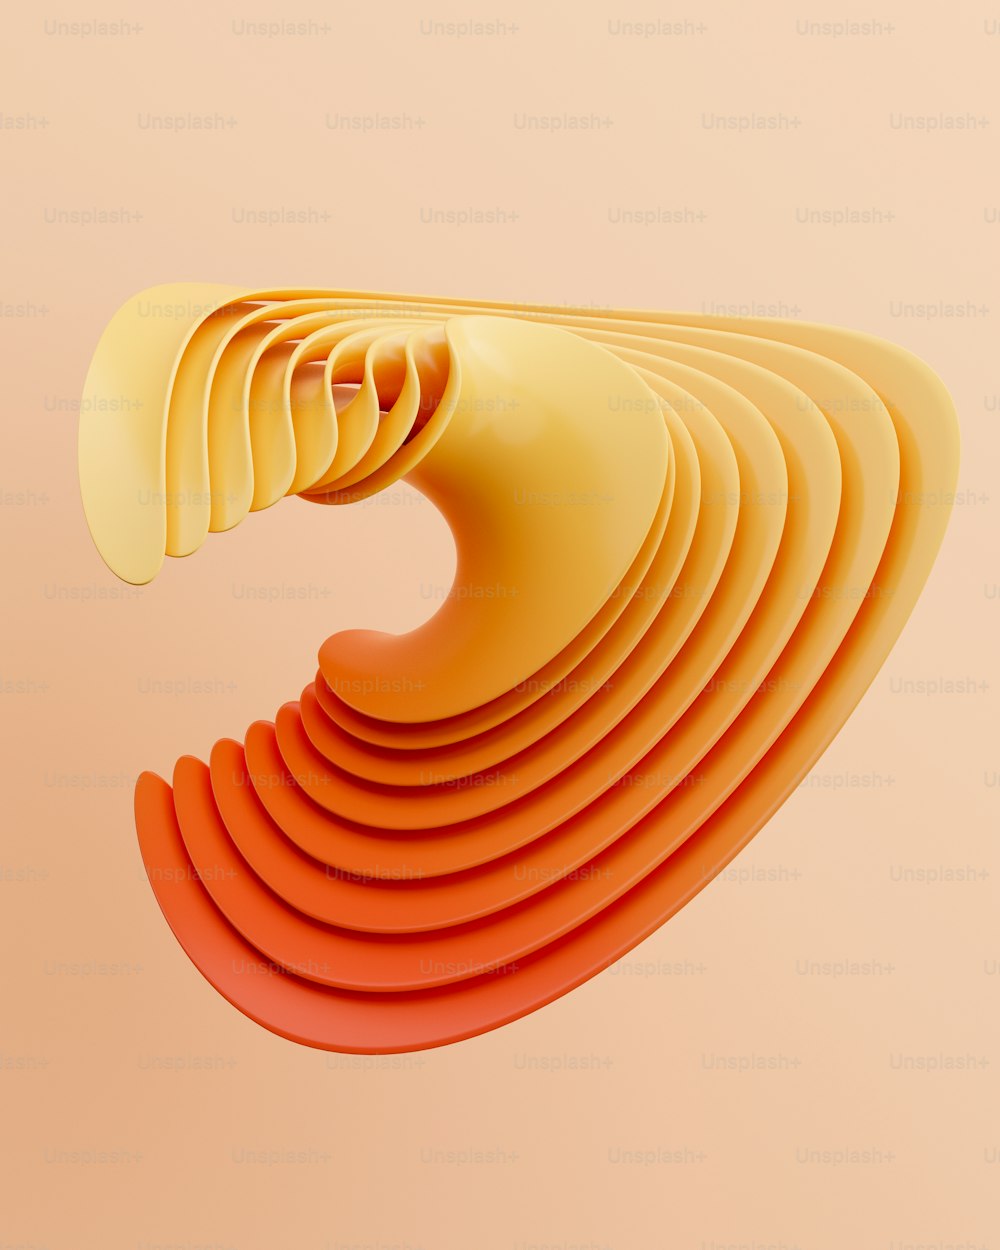 an abstract image of a curved orange object